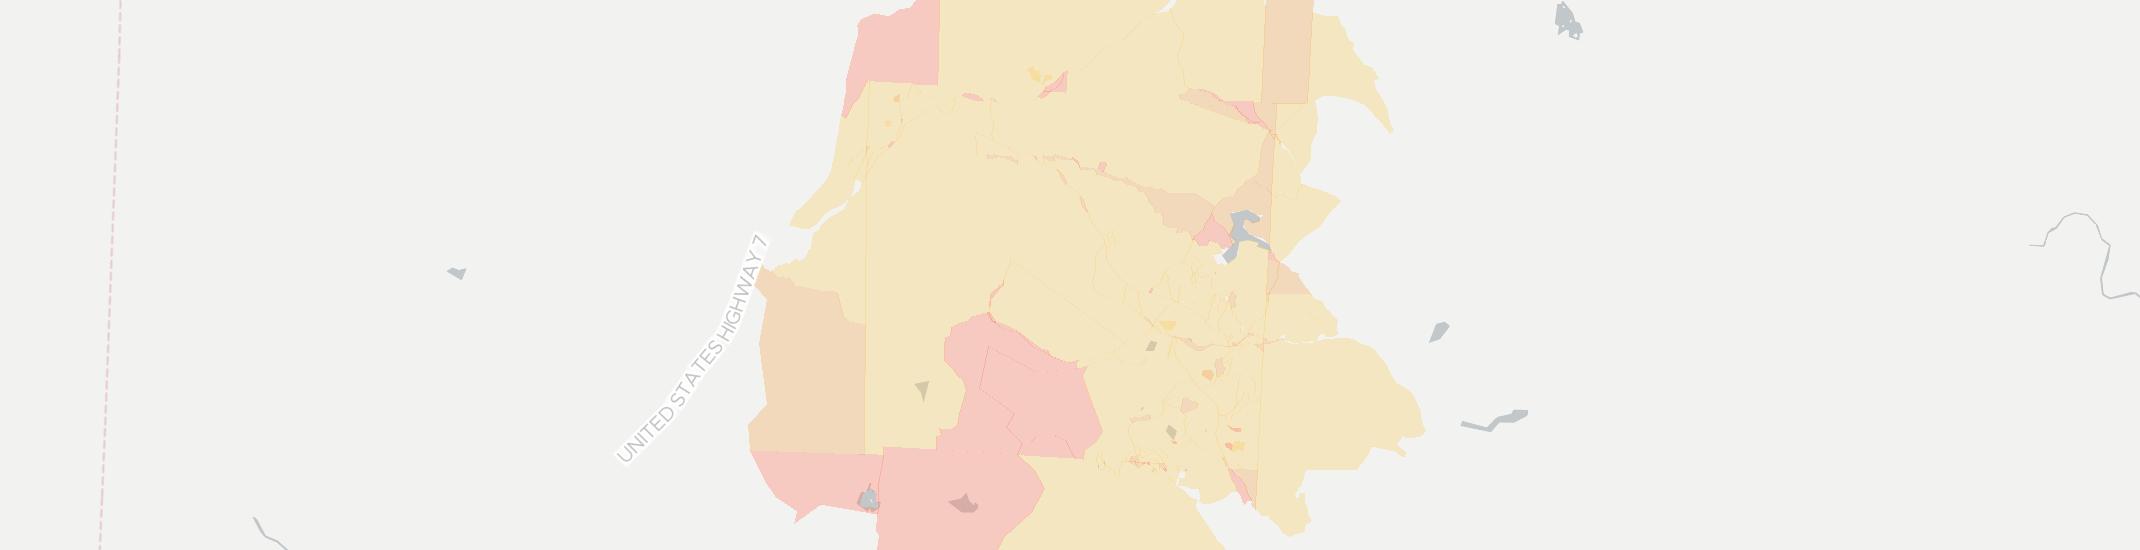 Bondville Internet Competition Map. Click for interactive map